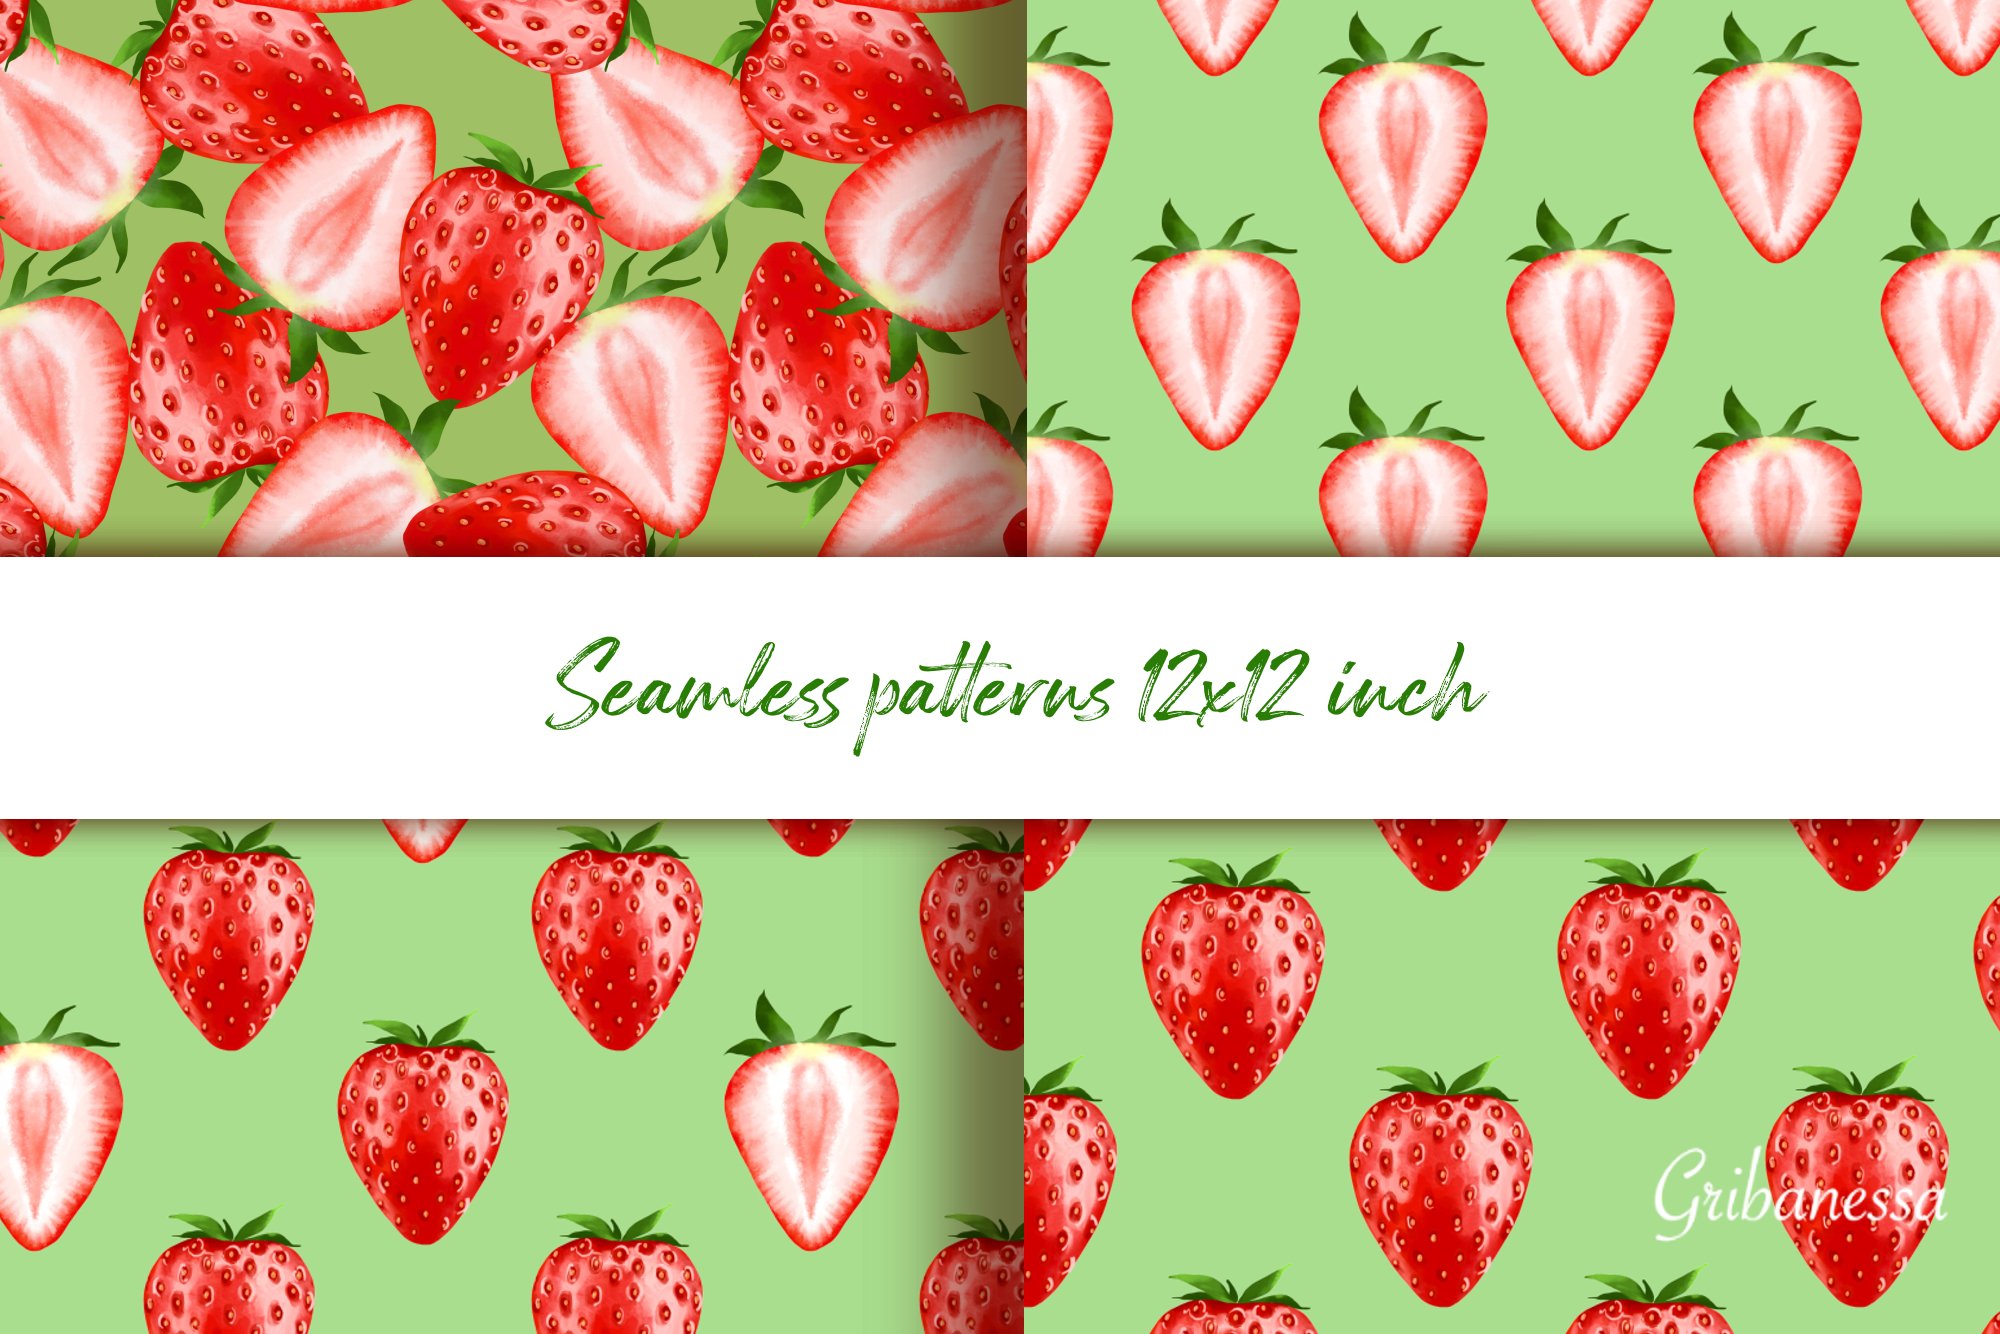 Green lettering "Seamless Patterns 12x12 inch" and 4 different strawberry patterns.